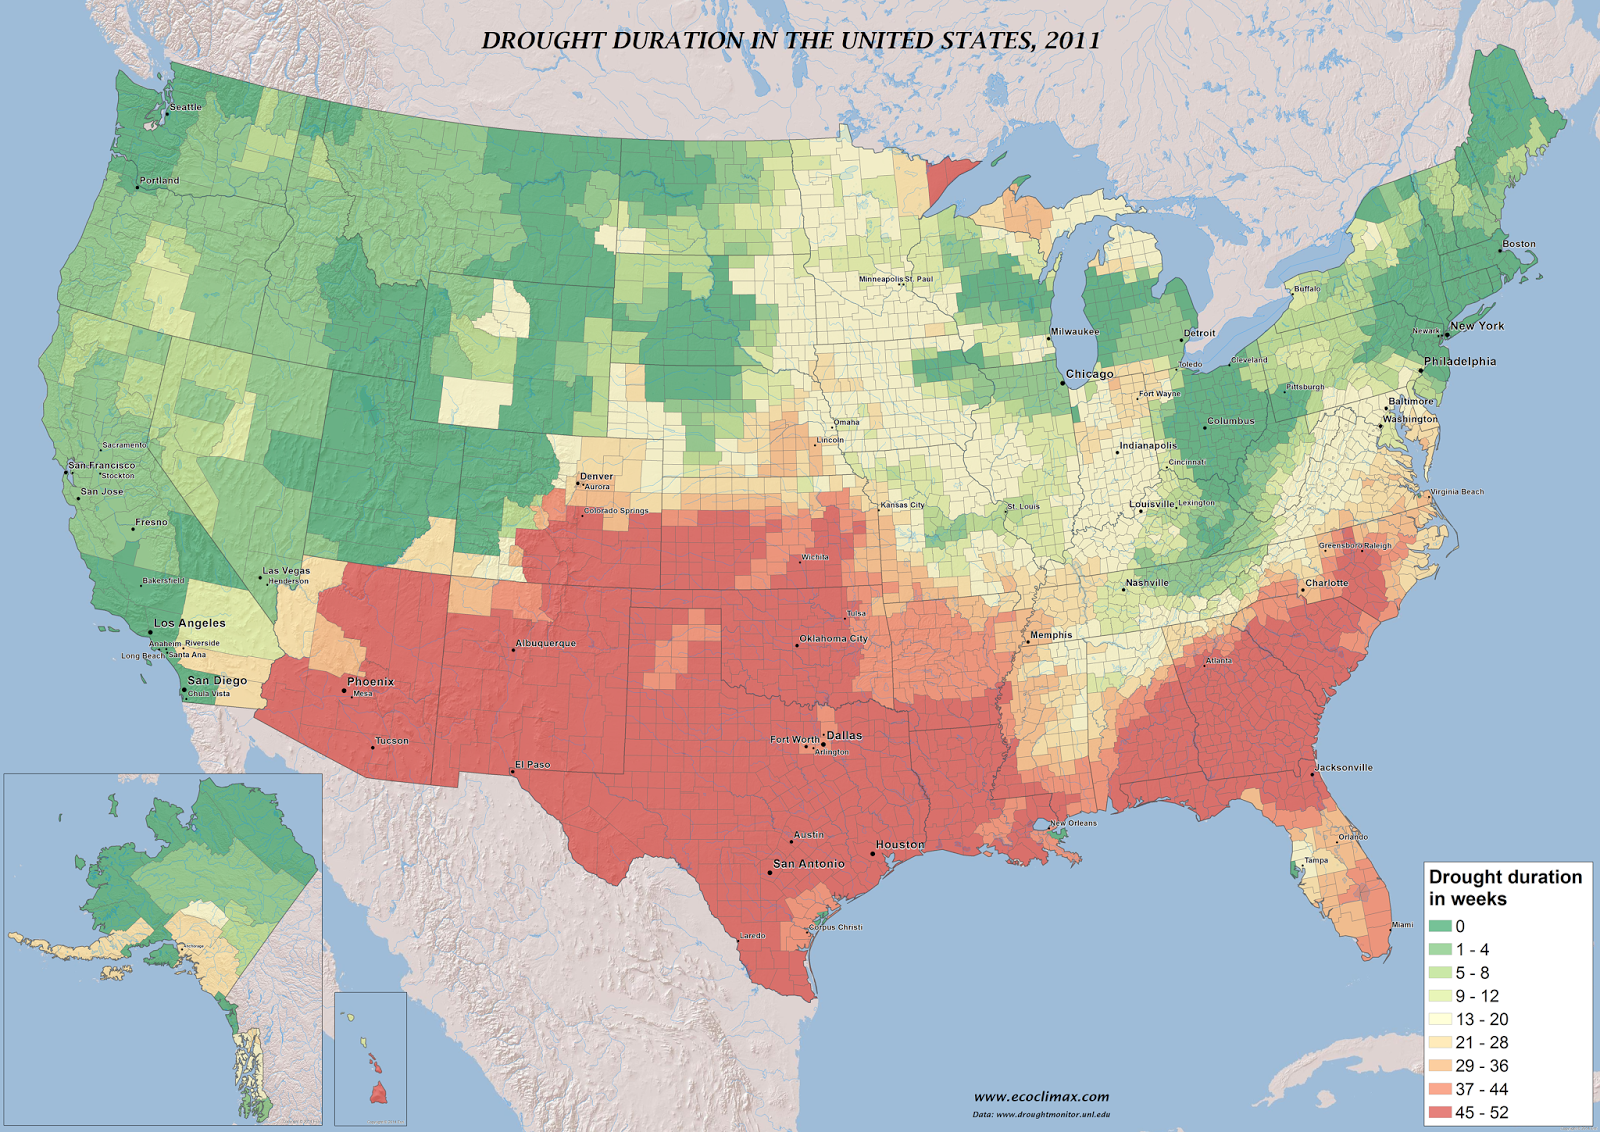 Drought duration in the United States (2011)